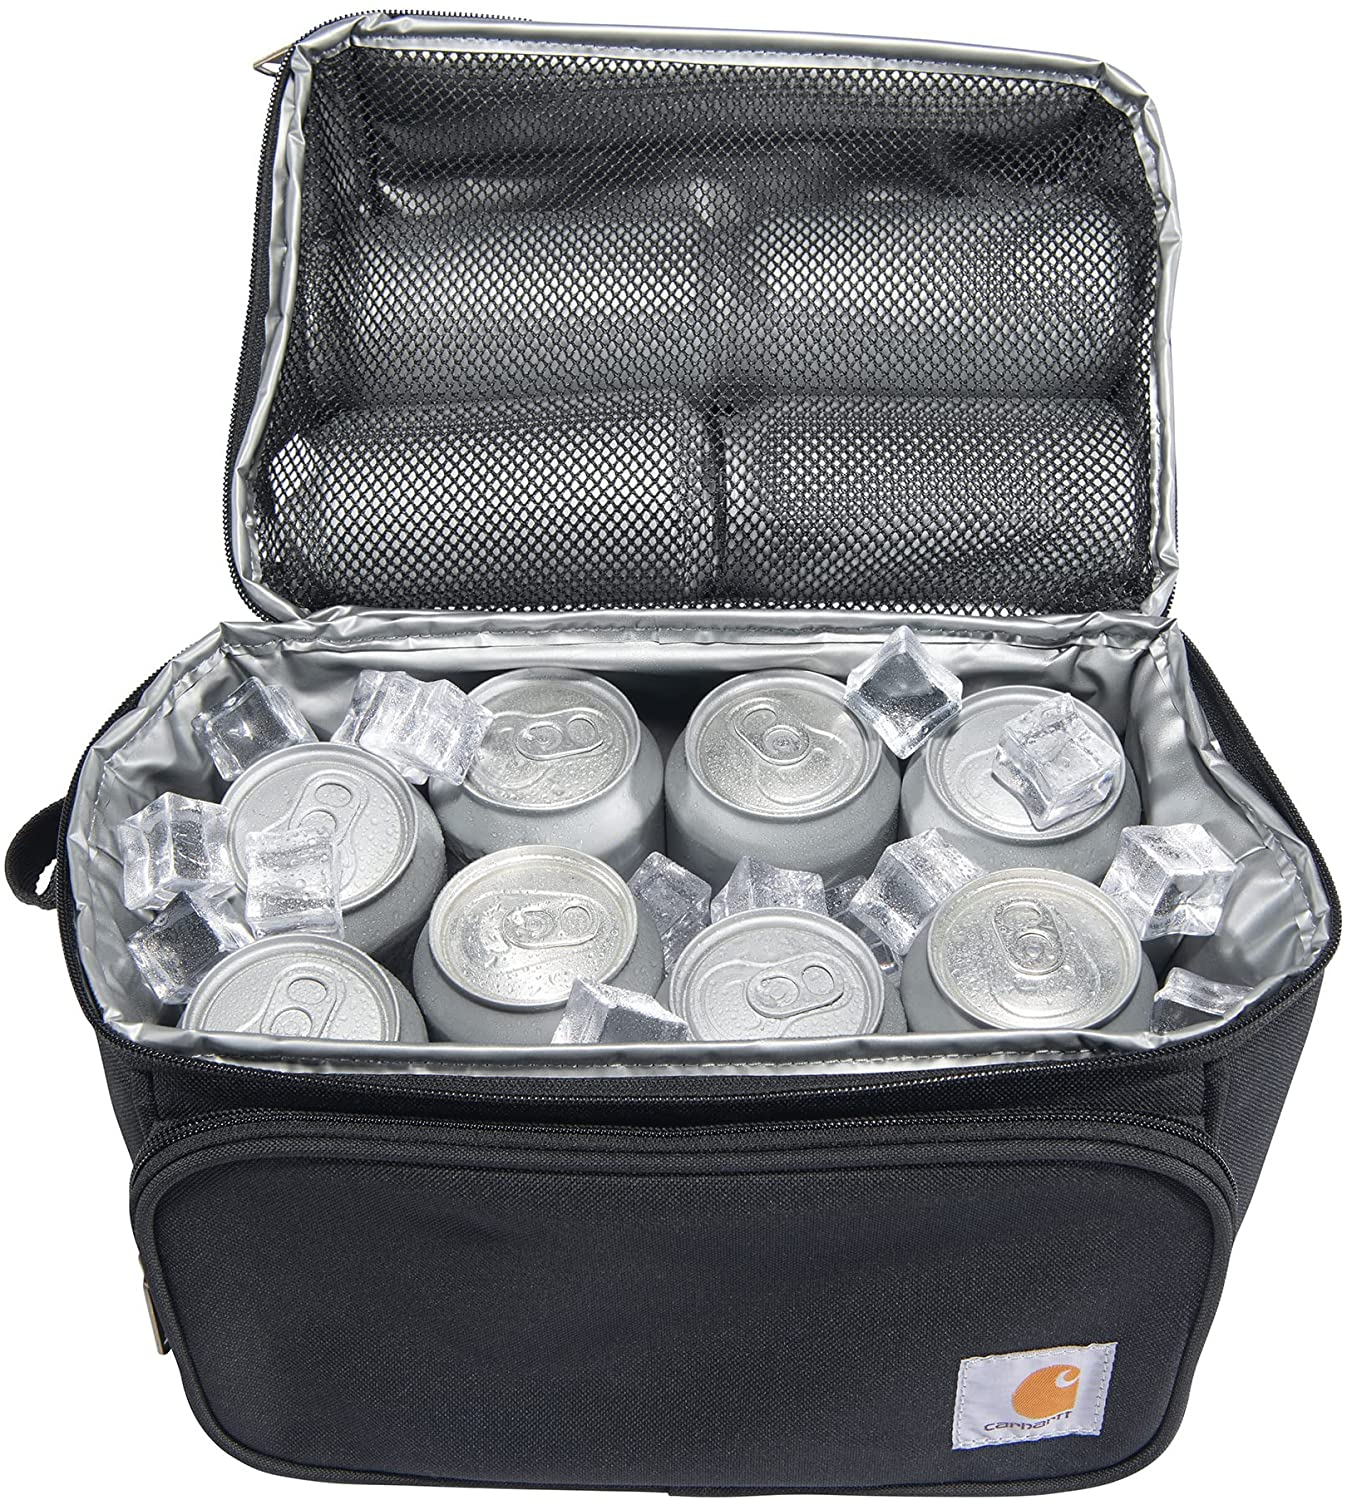 Deluxe Dual Compartment Insulated Lunch Cooler Bag, Black